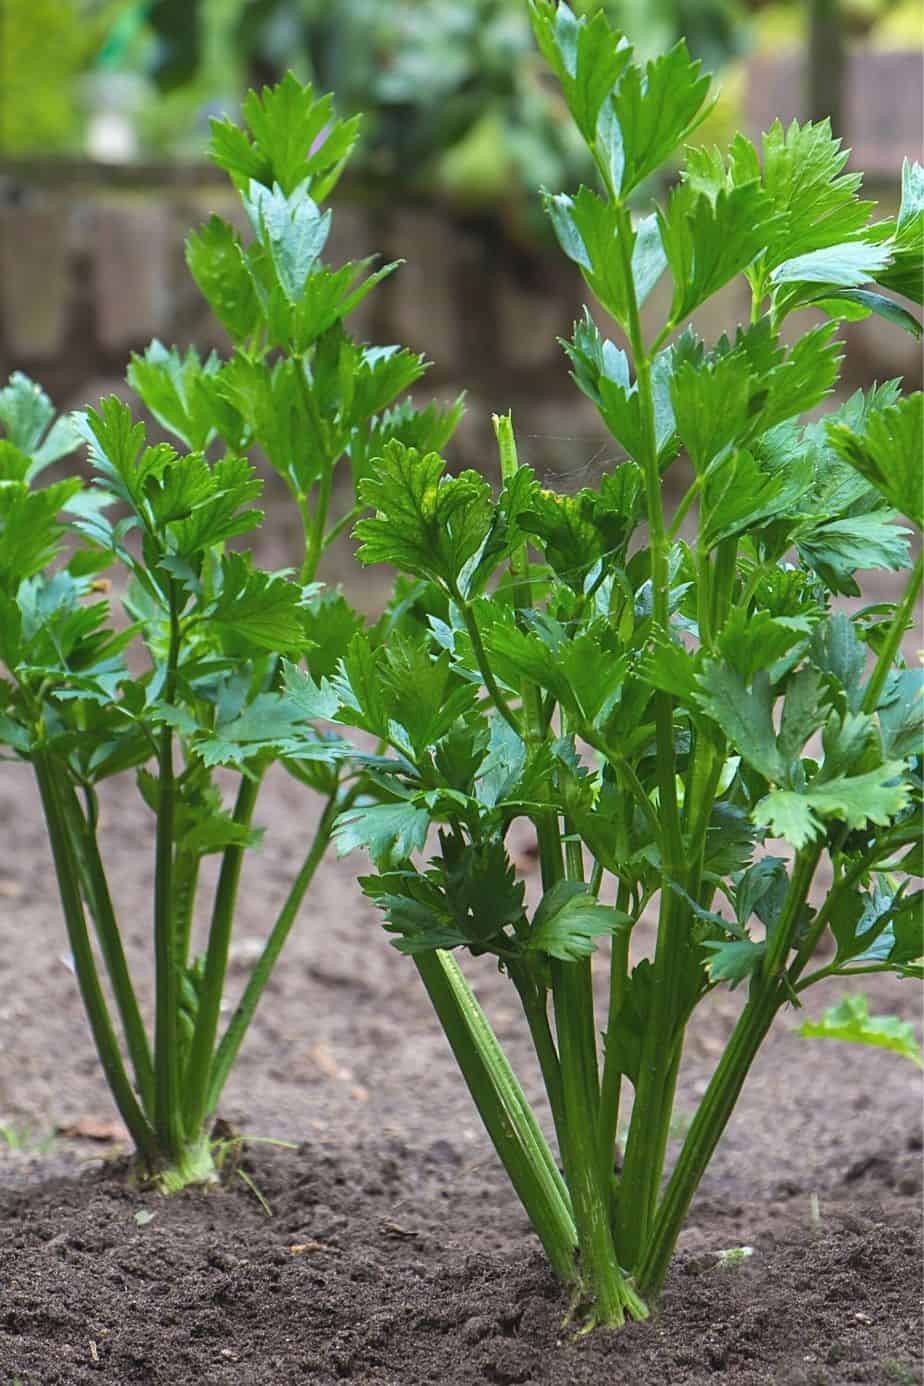 Though Celery is a time-consuming plant, it grows well in a raised bed garden